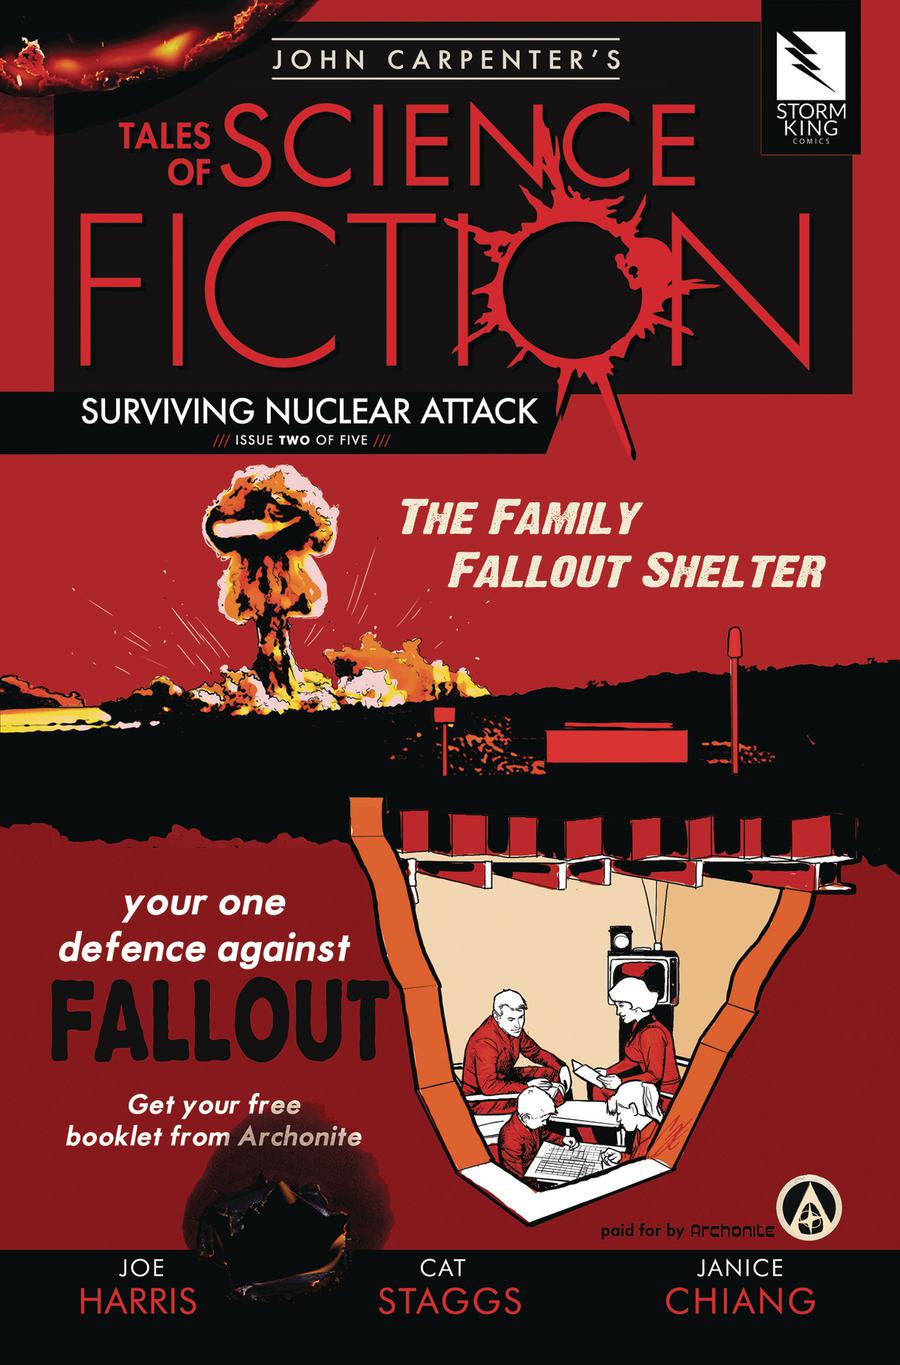 John Carpenters Tales Of Science Fiction Surviving Nuclear Attack #2